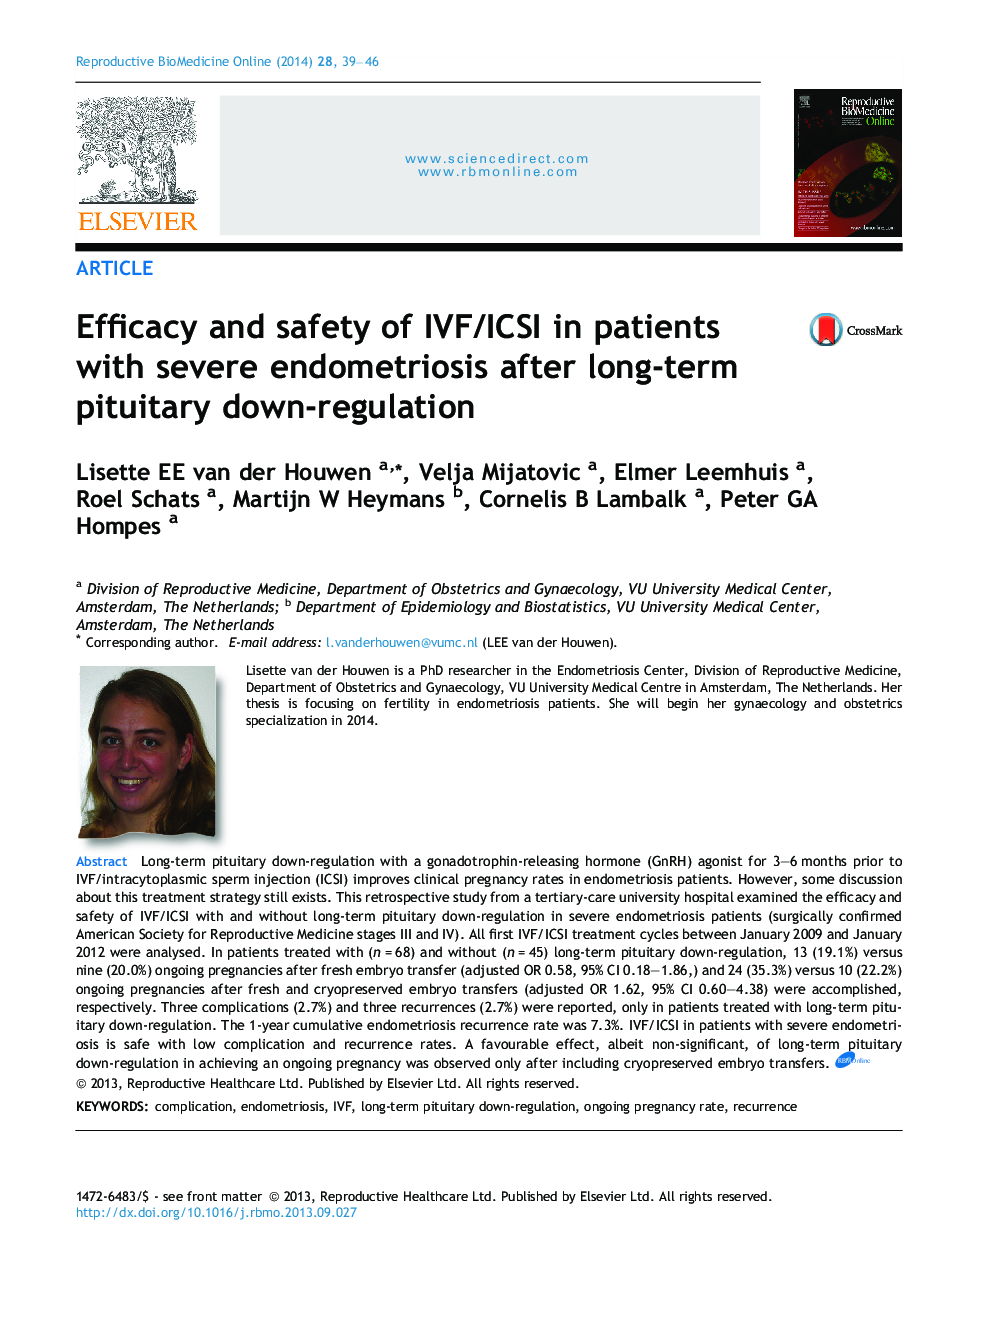 Efficacy and safety of IVF/ICSI in patients with severe endometriosis after long-term pituitary down-regulation 